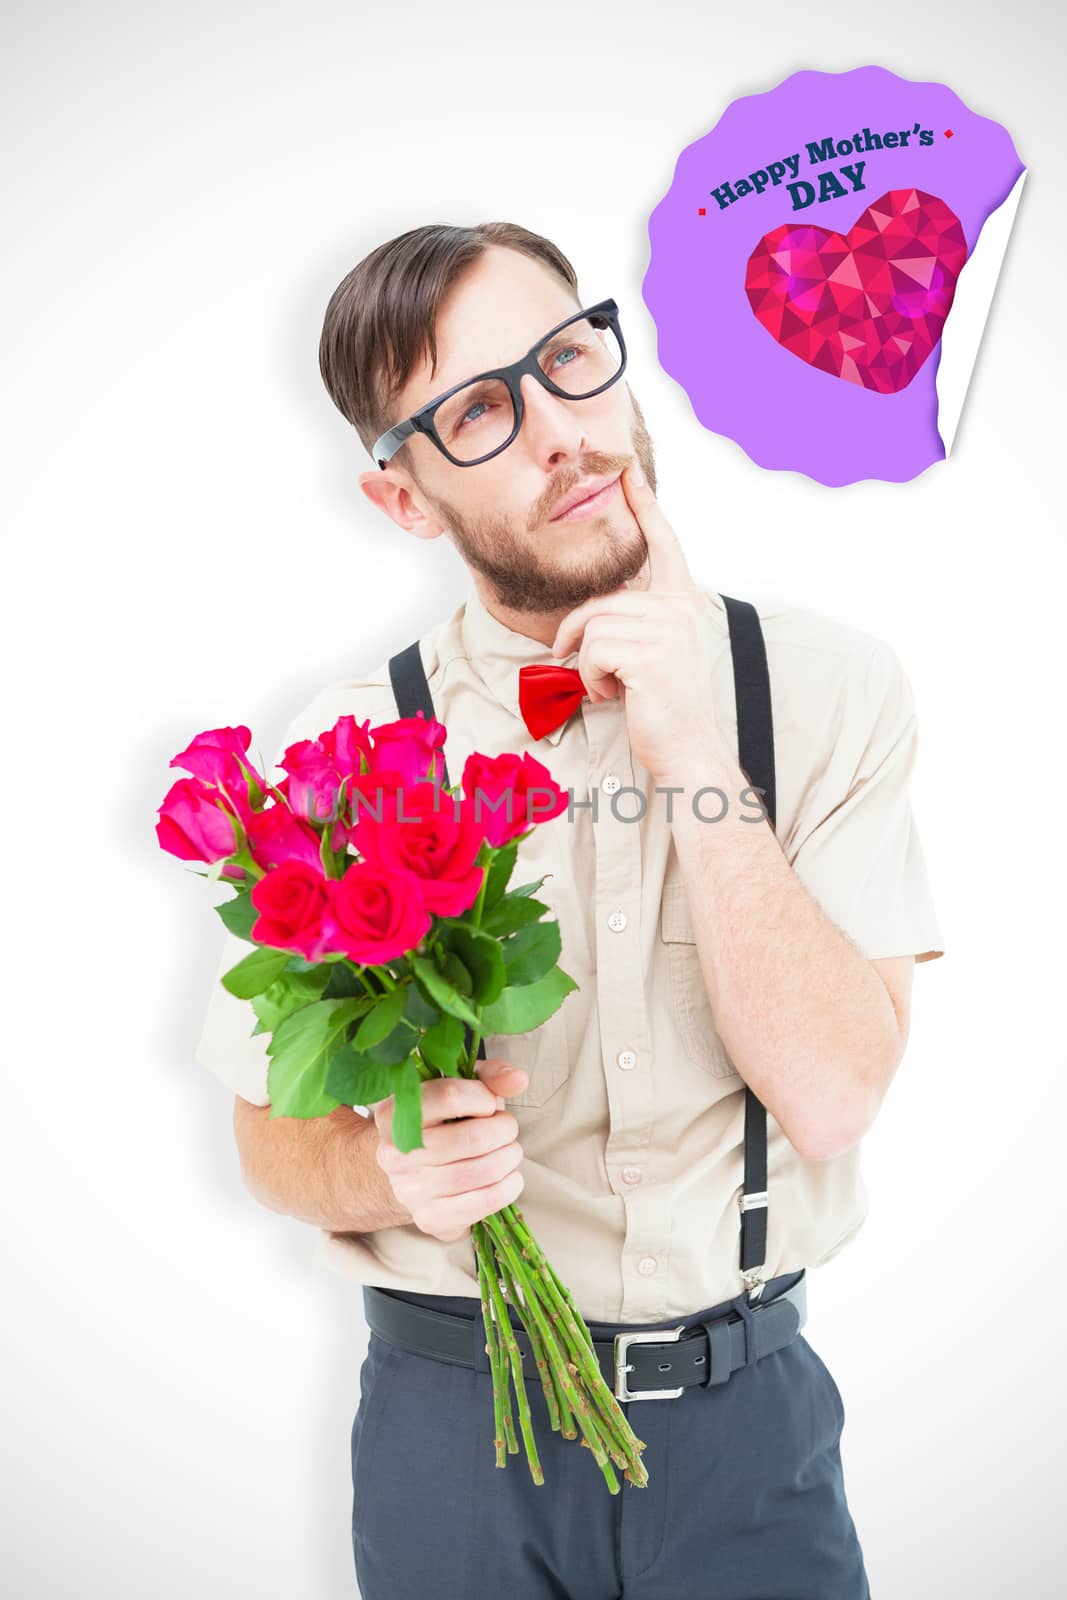 Geeky hipster offering bunch of roses against happy mothers day